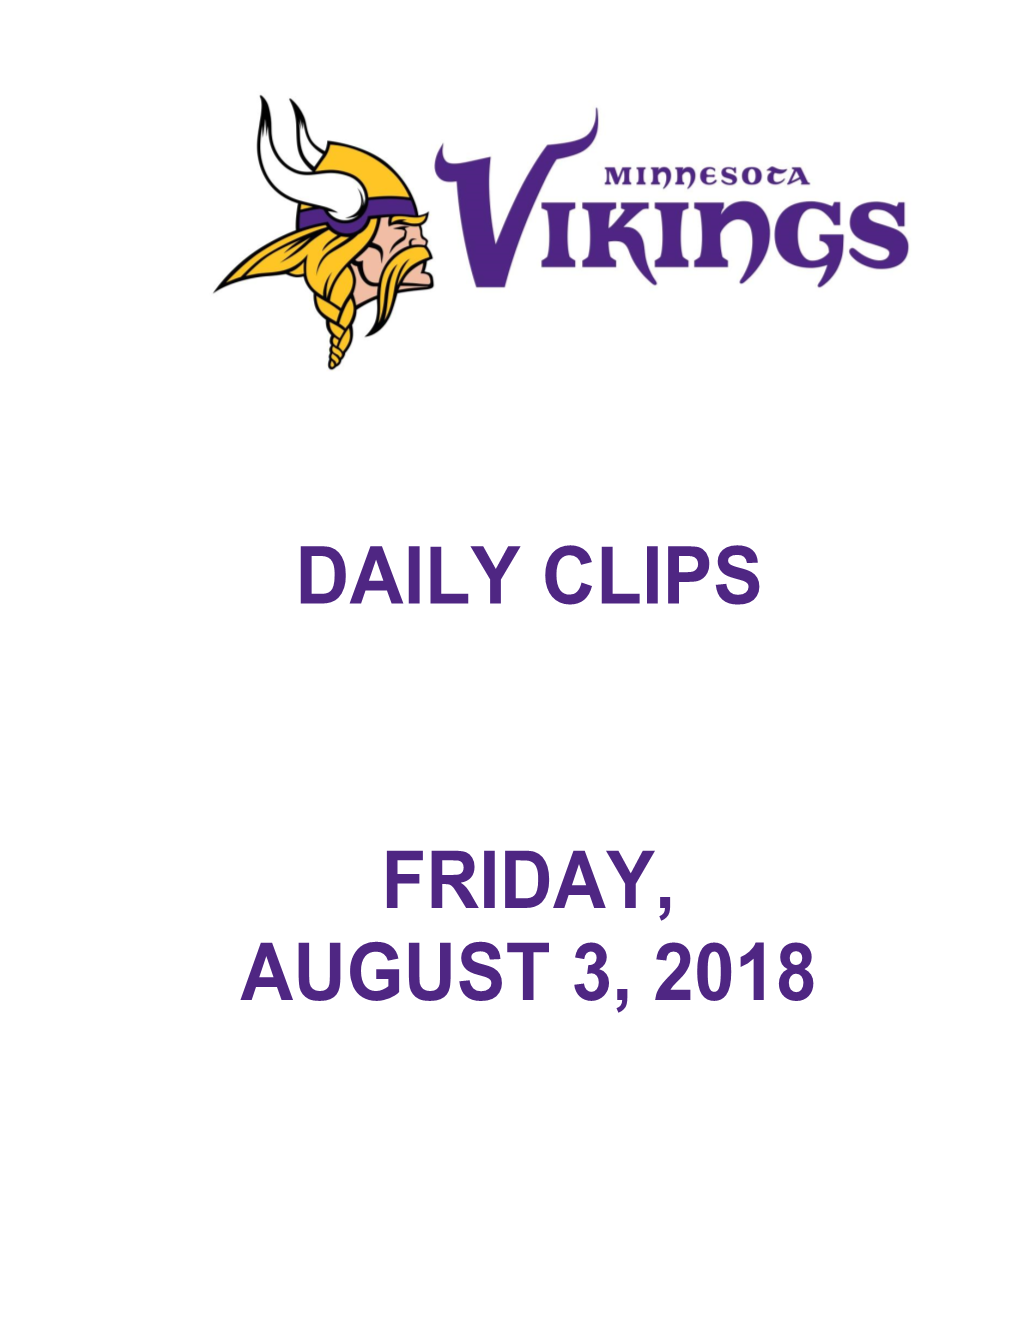 Daily Clips Friday, August 3, 2018